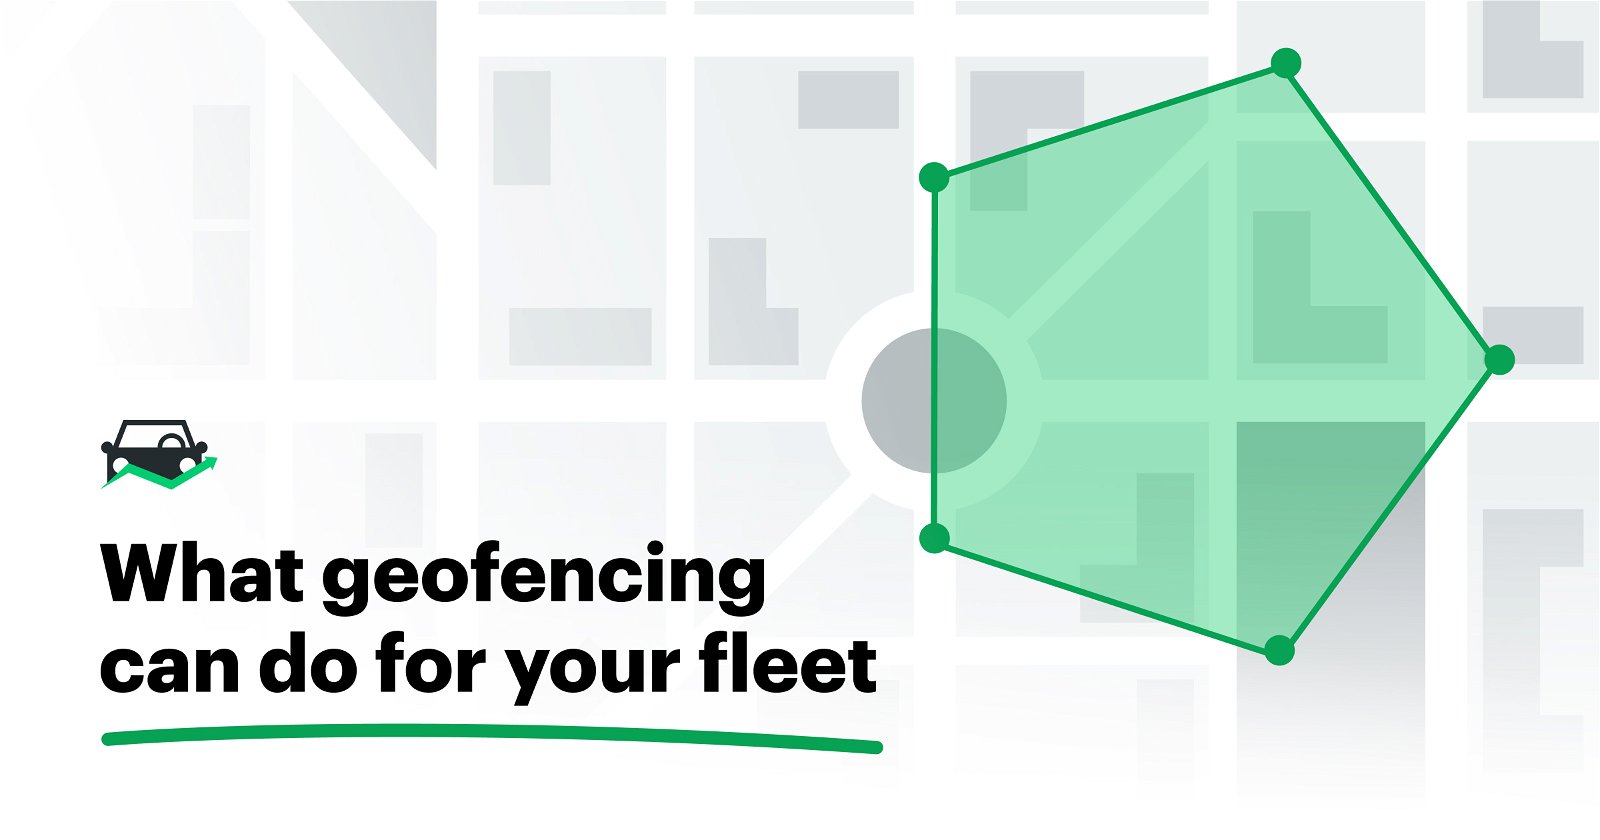 What geofencing can do for your fleet